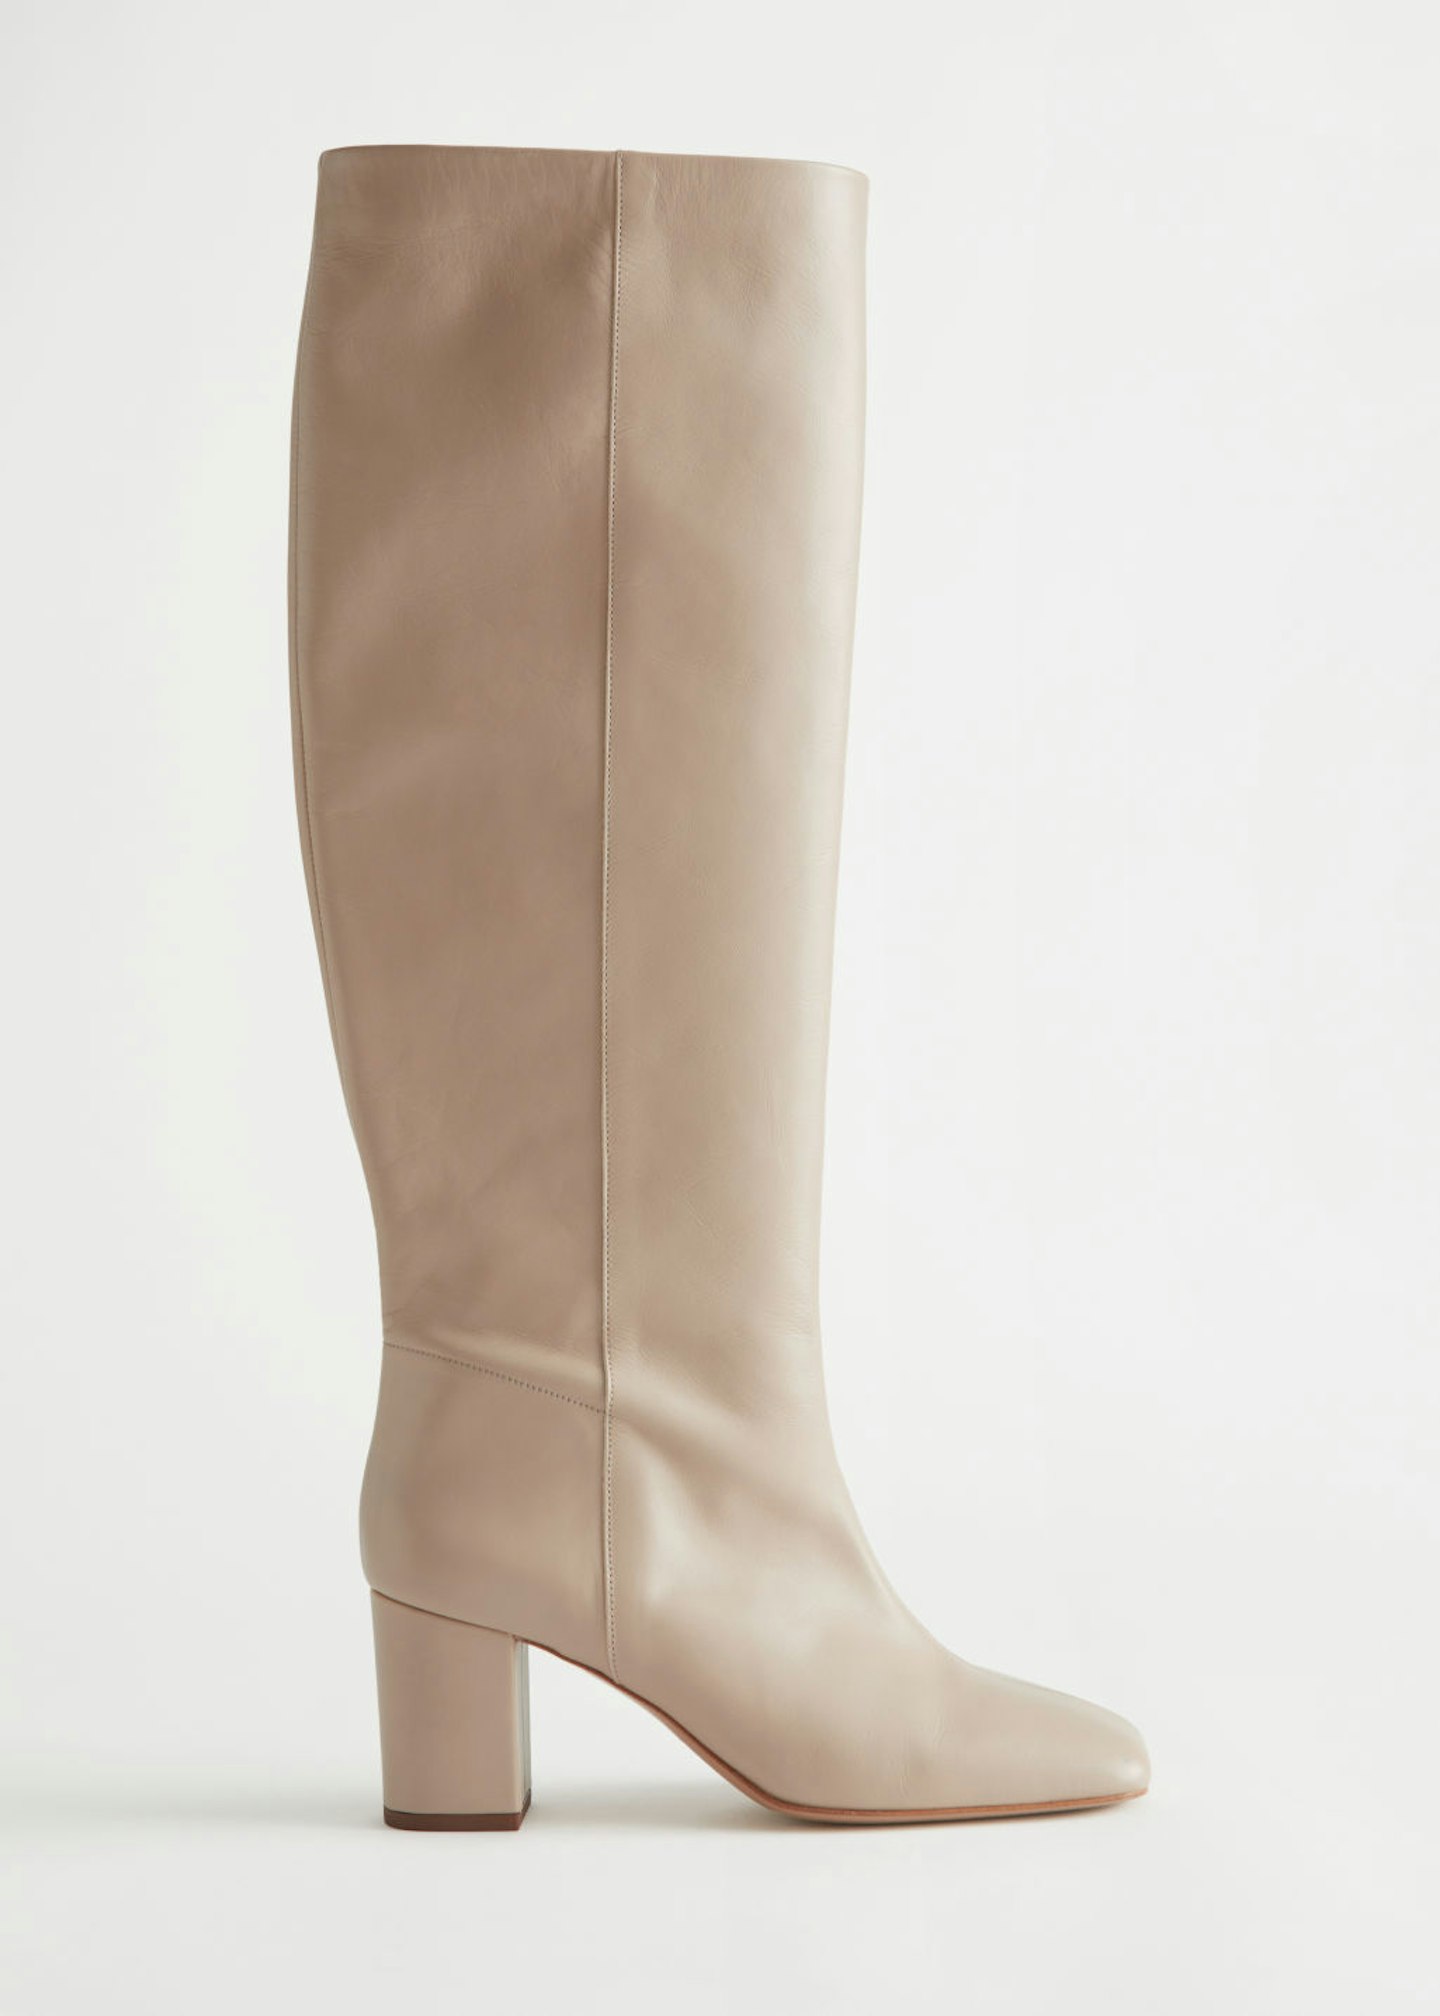 & Other Stories, Square Toe Leather Boots, £205